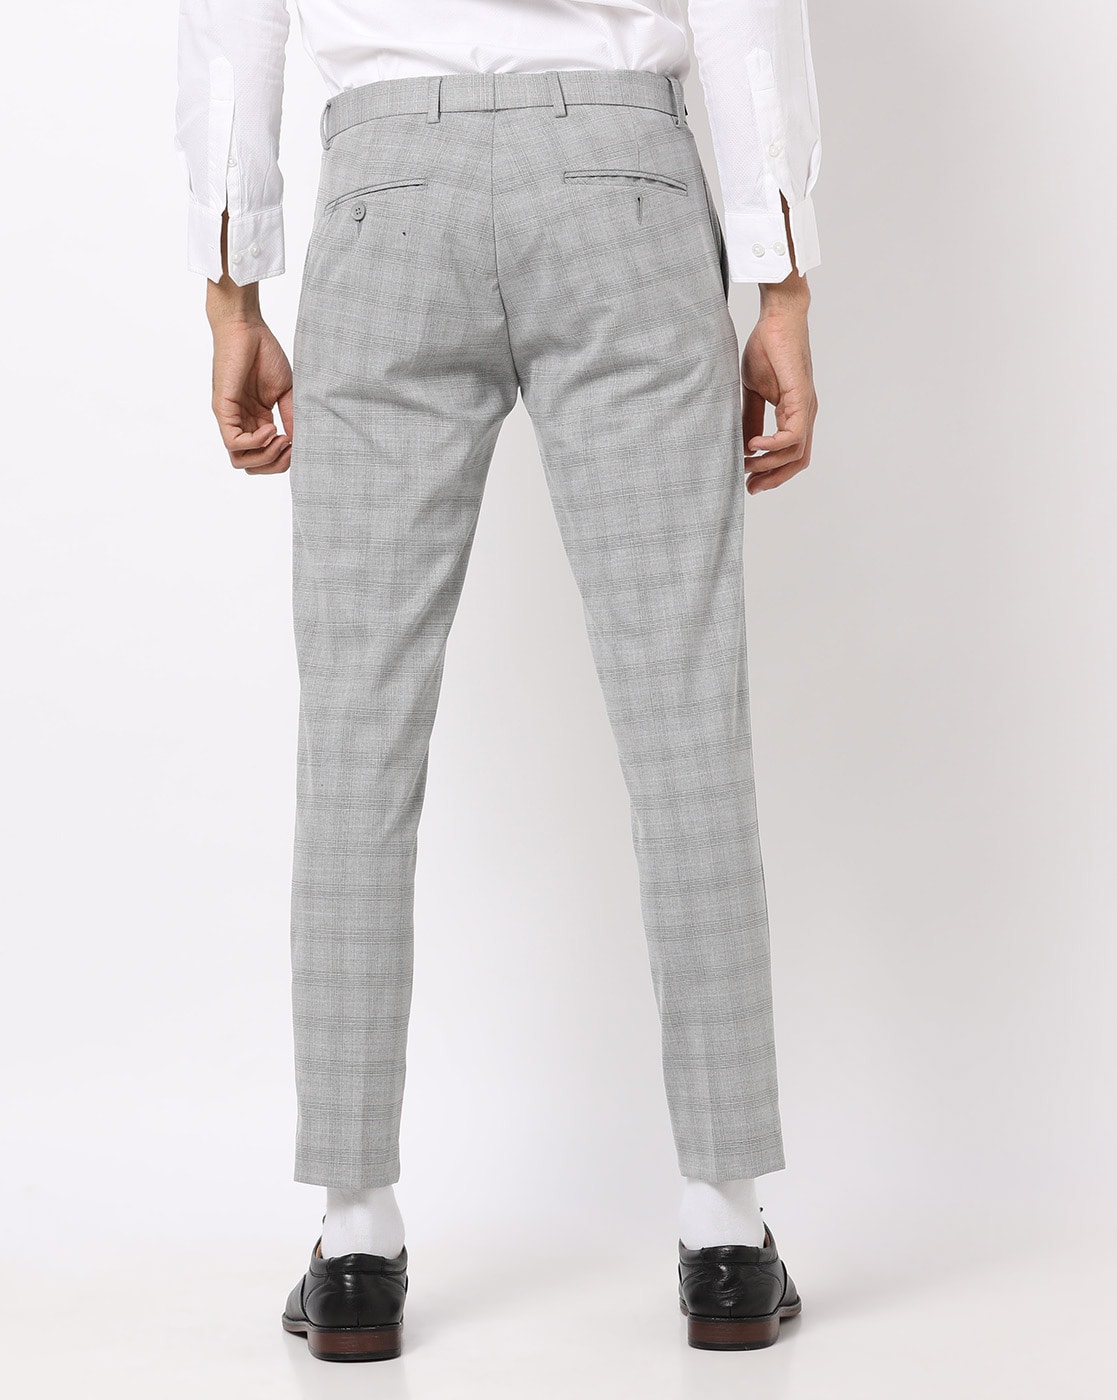 Antique Rogue Grey Chocolate Check Trousers